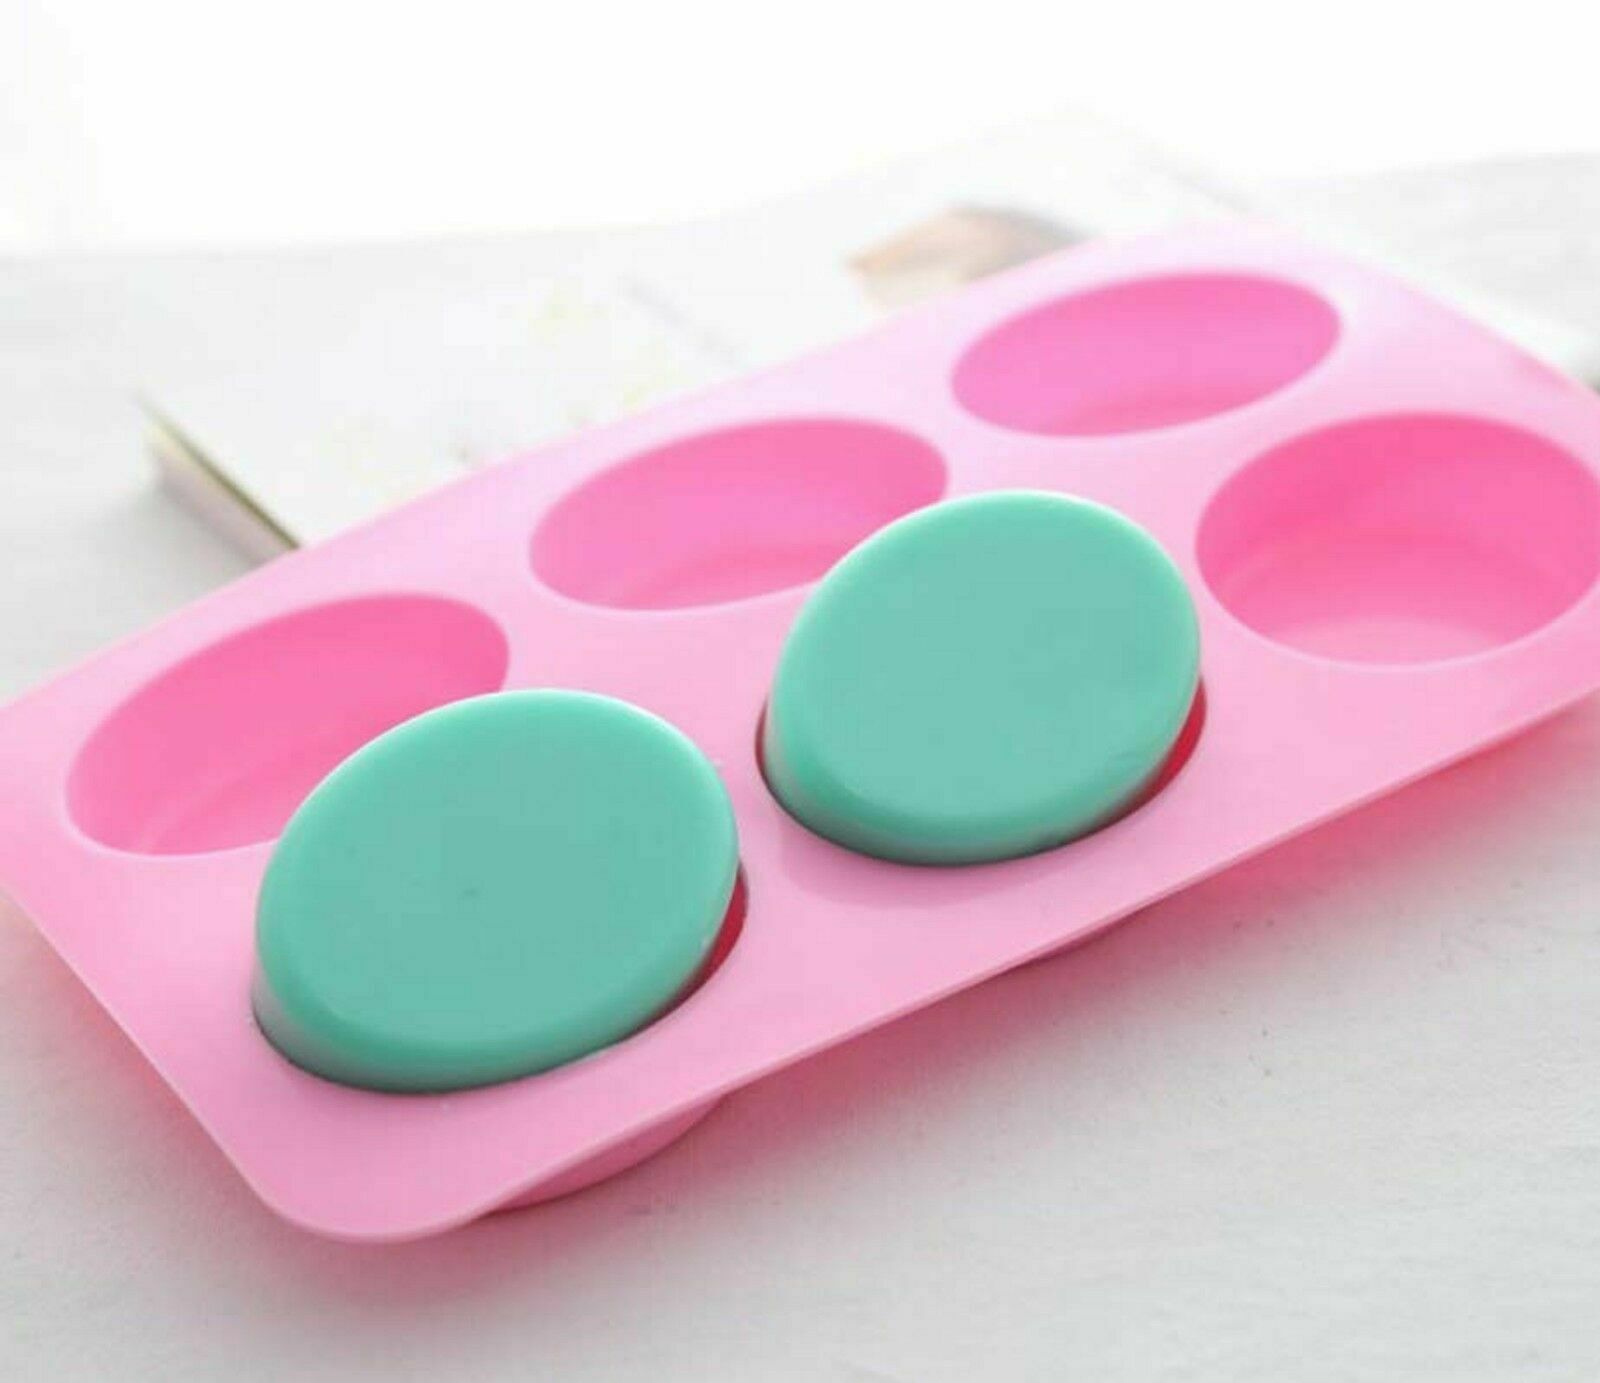 6 Cavities Silicone Soap Molds Oval Square Mould with Mixed Flower Patterns  DIY Handmade Craft Cake Mousse Chocolate Making Tool